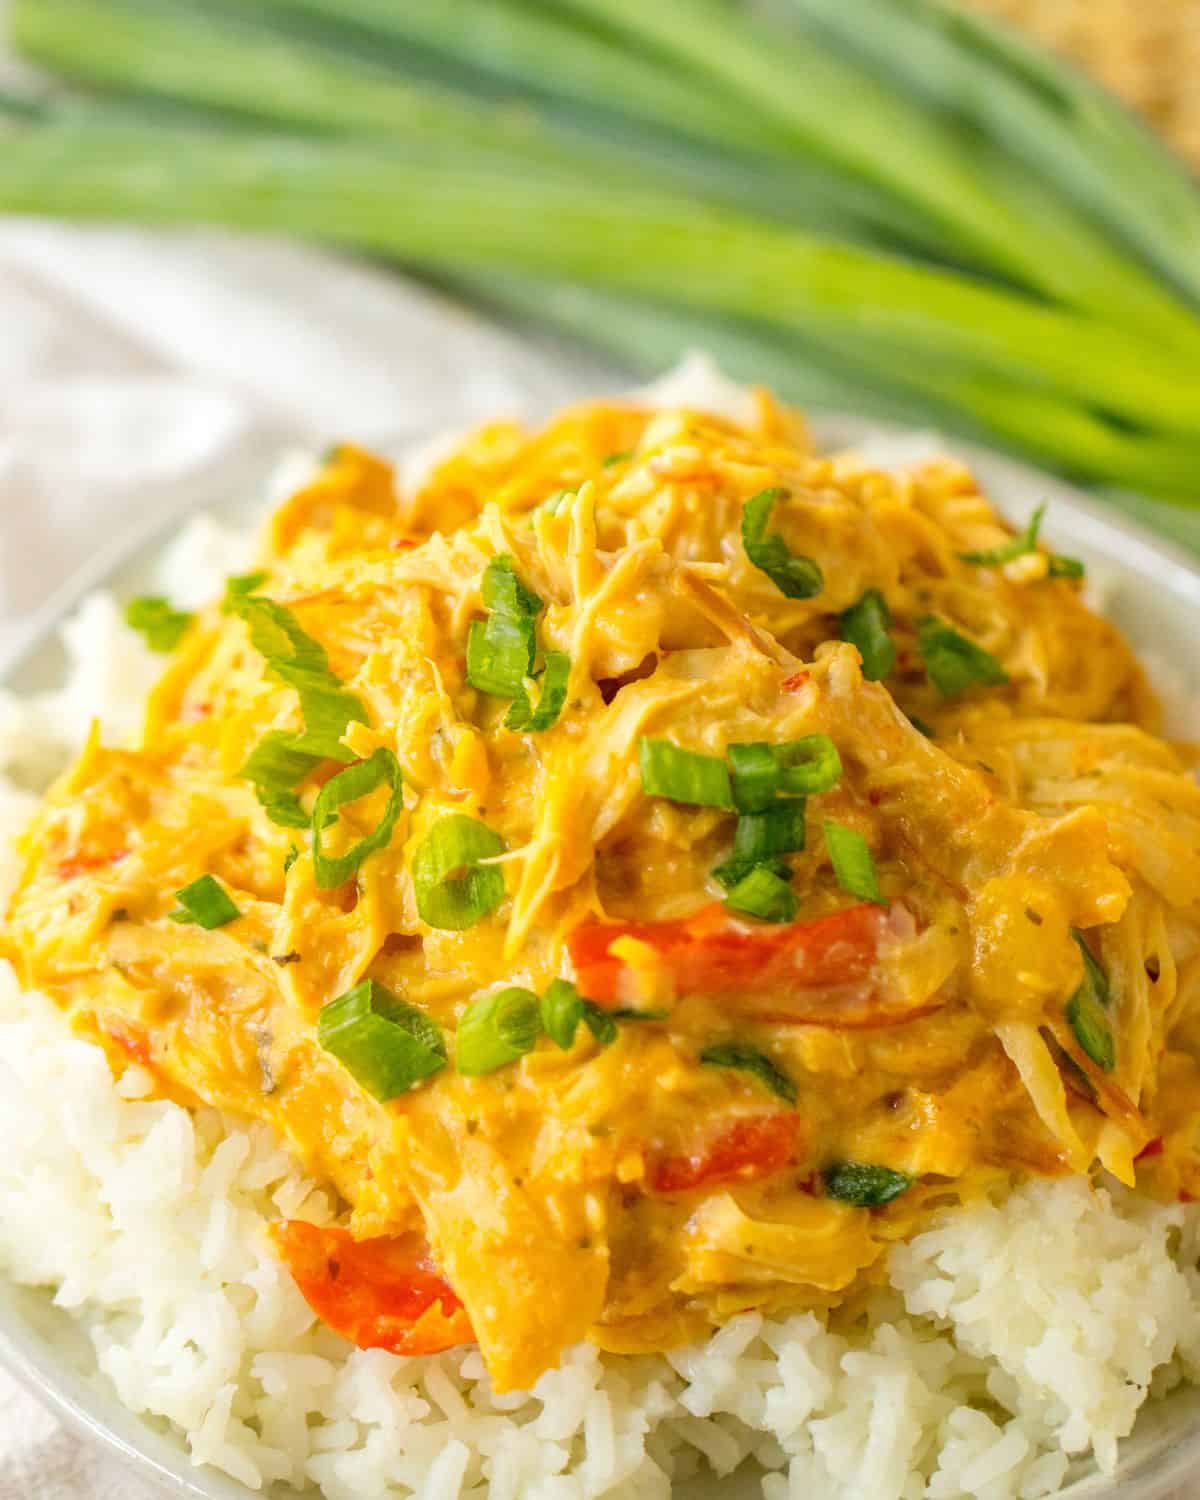 Sweet chicken made with chili sauce served over rice. 